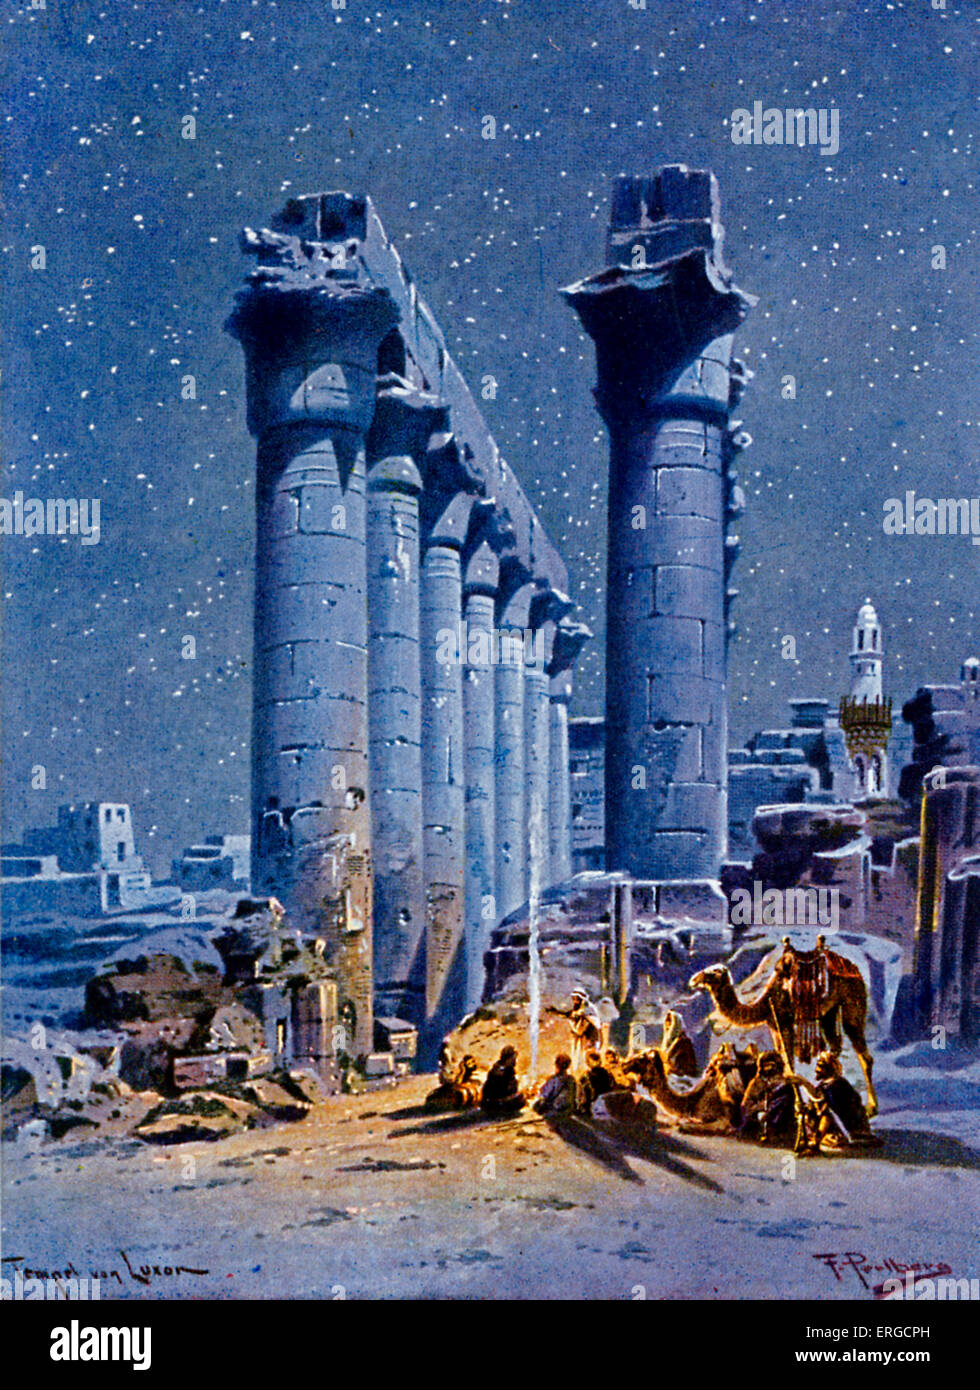 Remains of Temple in Luxor, Egypt. Illustration by Friedrich Perlberg Stock Photo